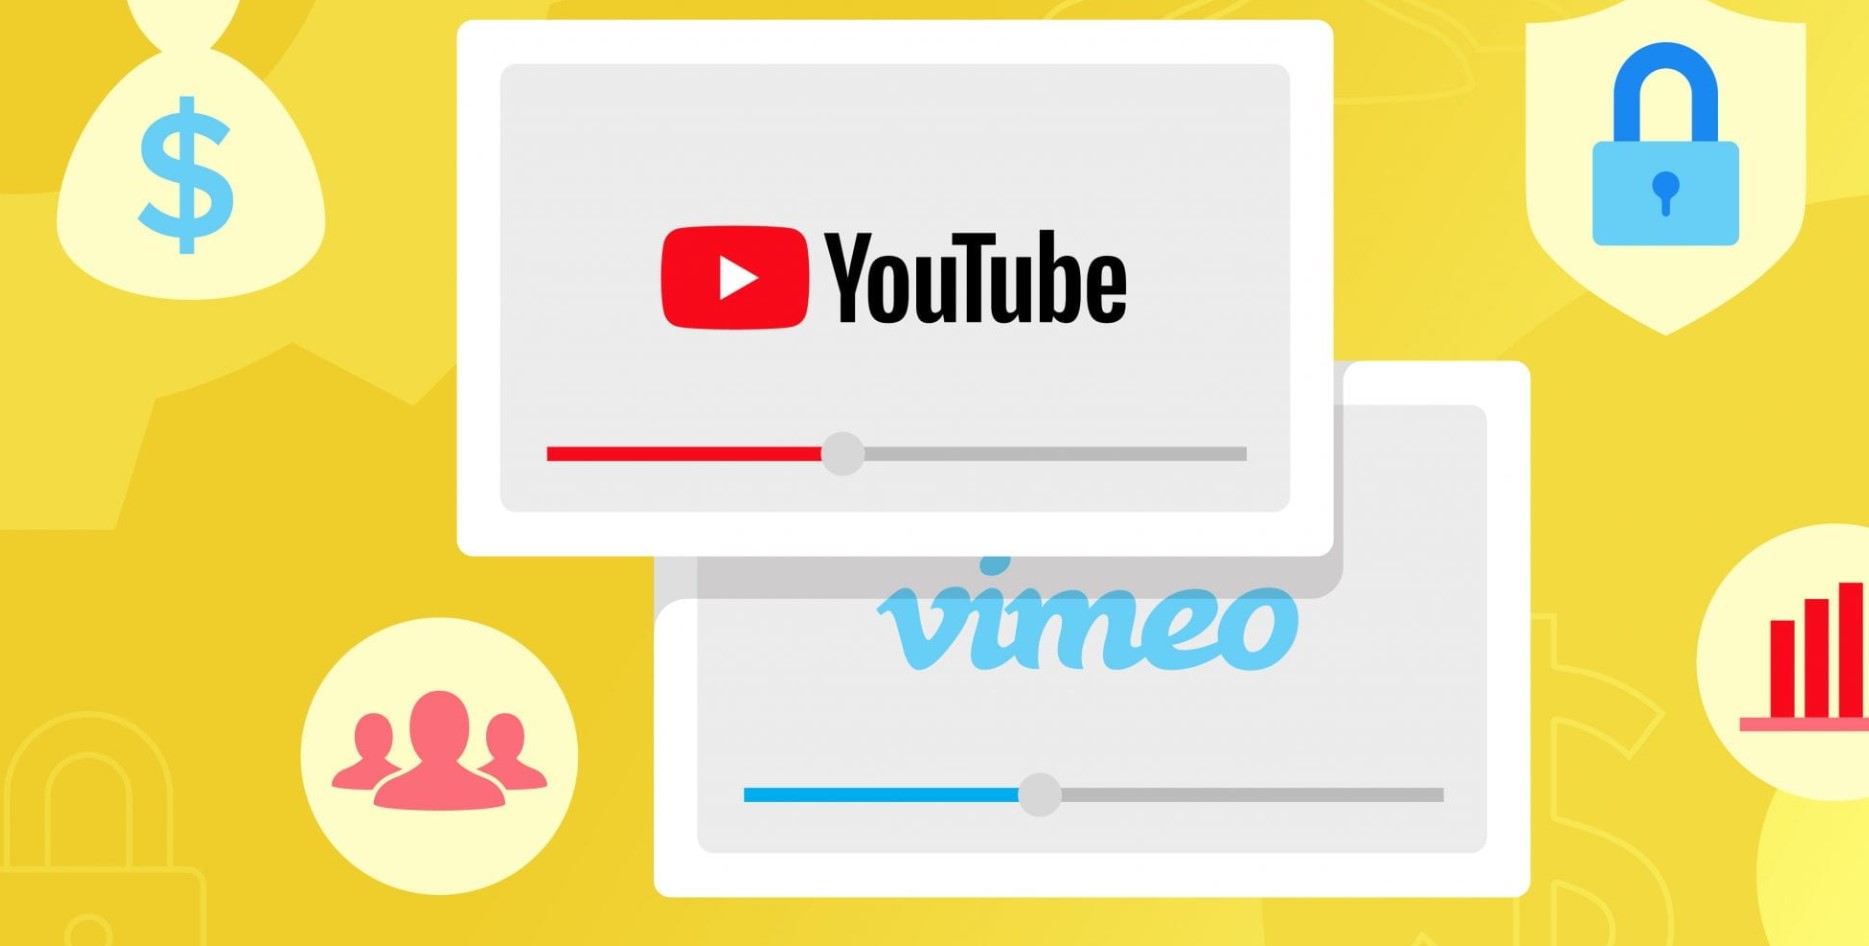 YouTube to Vimeo: A Comparison of Video Sharing and Conversion Tools